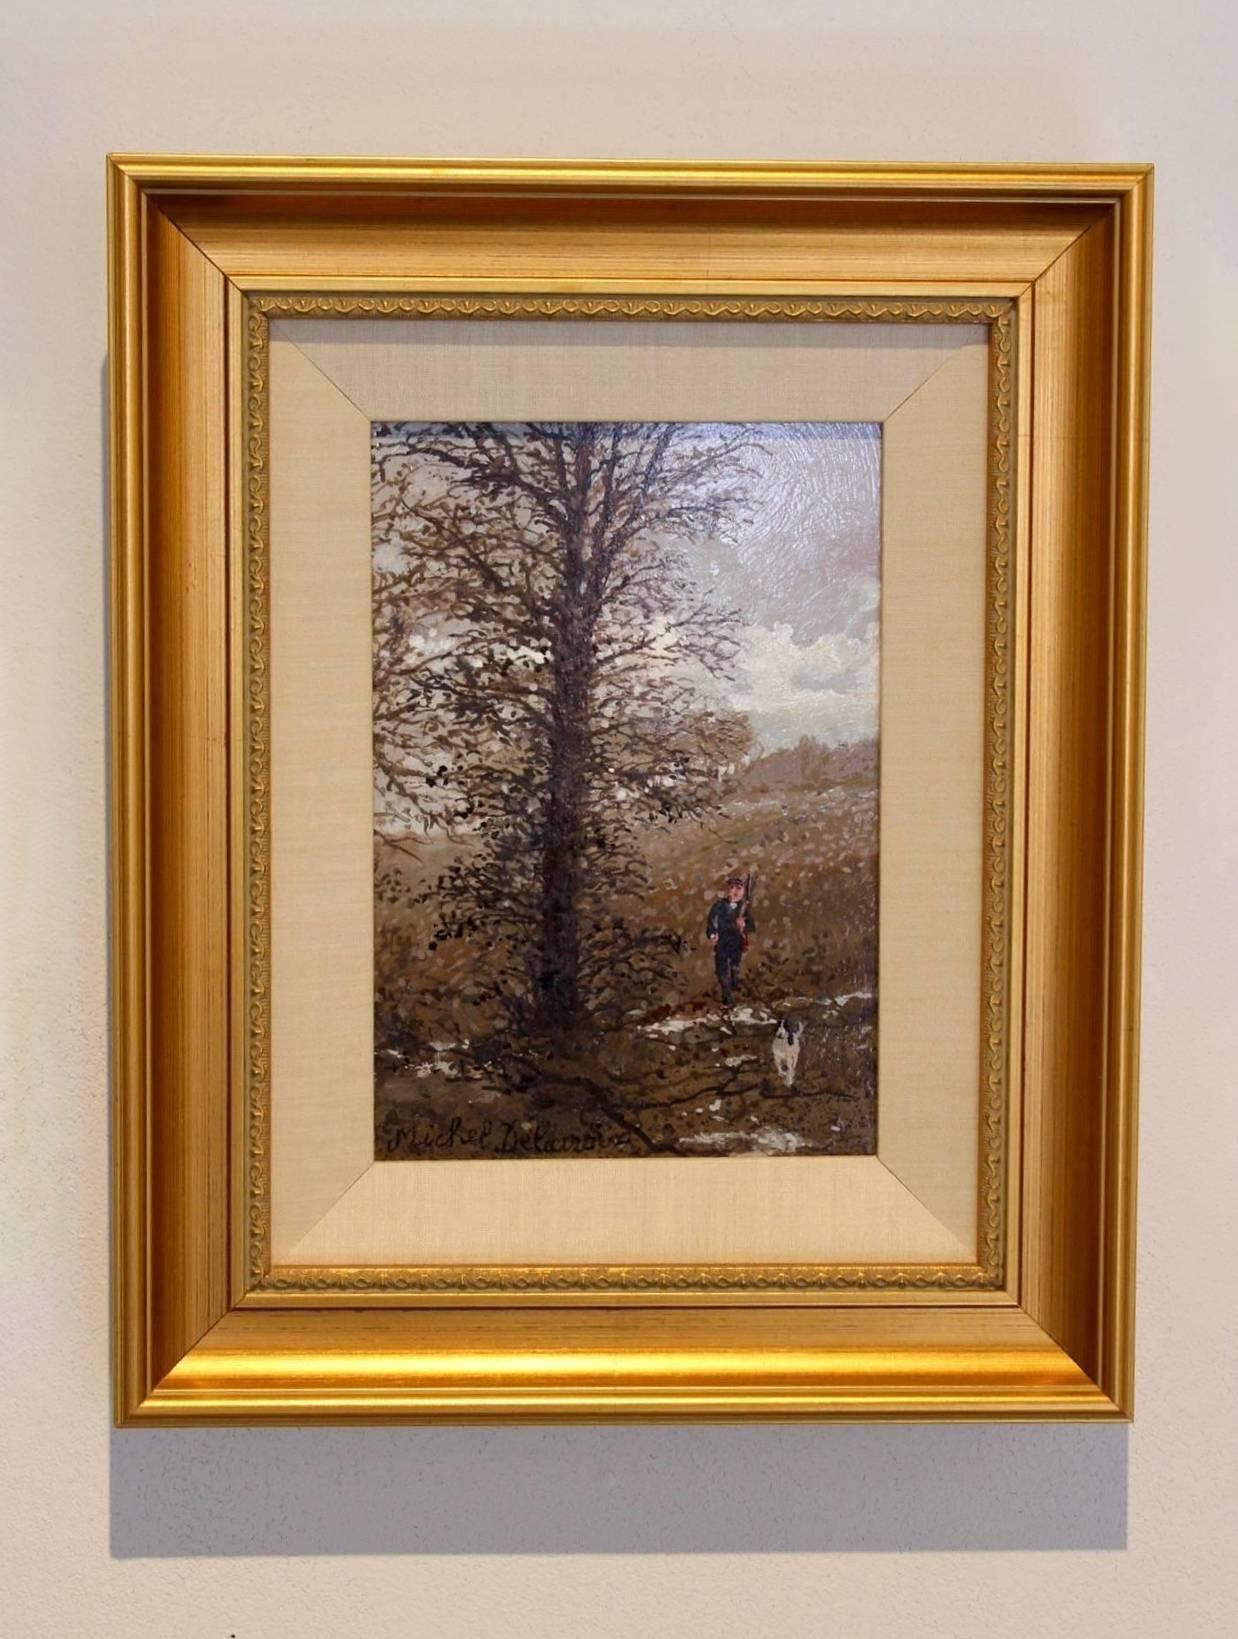 This impressionist style acrylic painting depicts early morning on the French countryside. The painting presents a man hunting with a dog, surrounded by trees and fields of tall grass lightly covered with snow. The color palette combines warm and